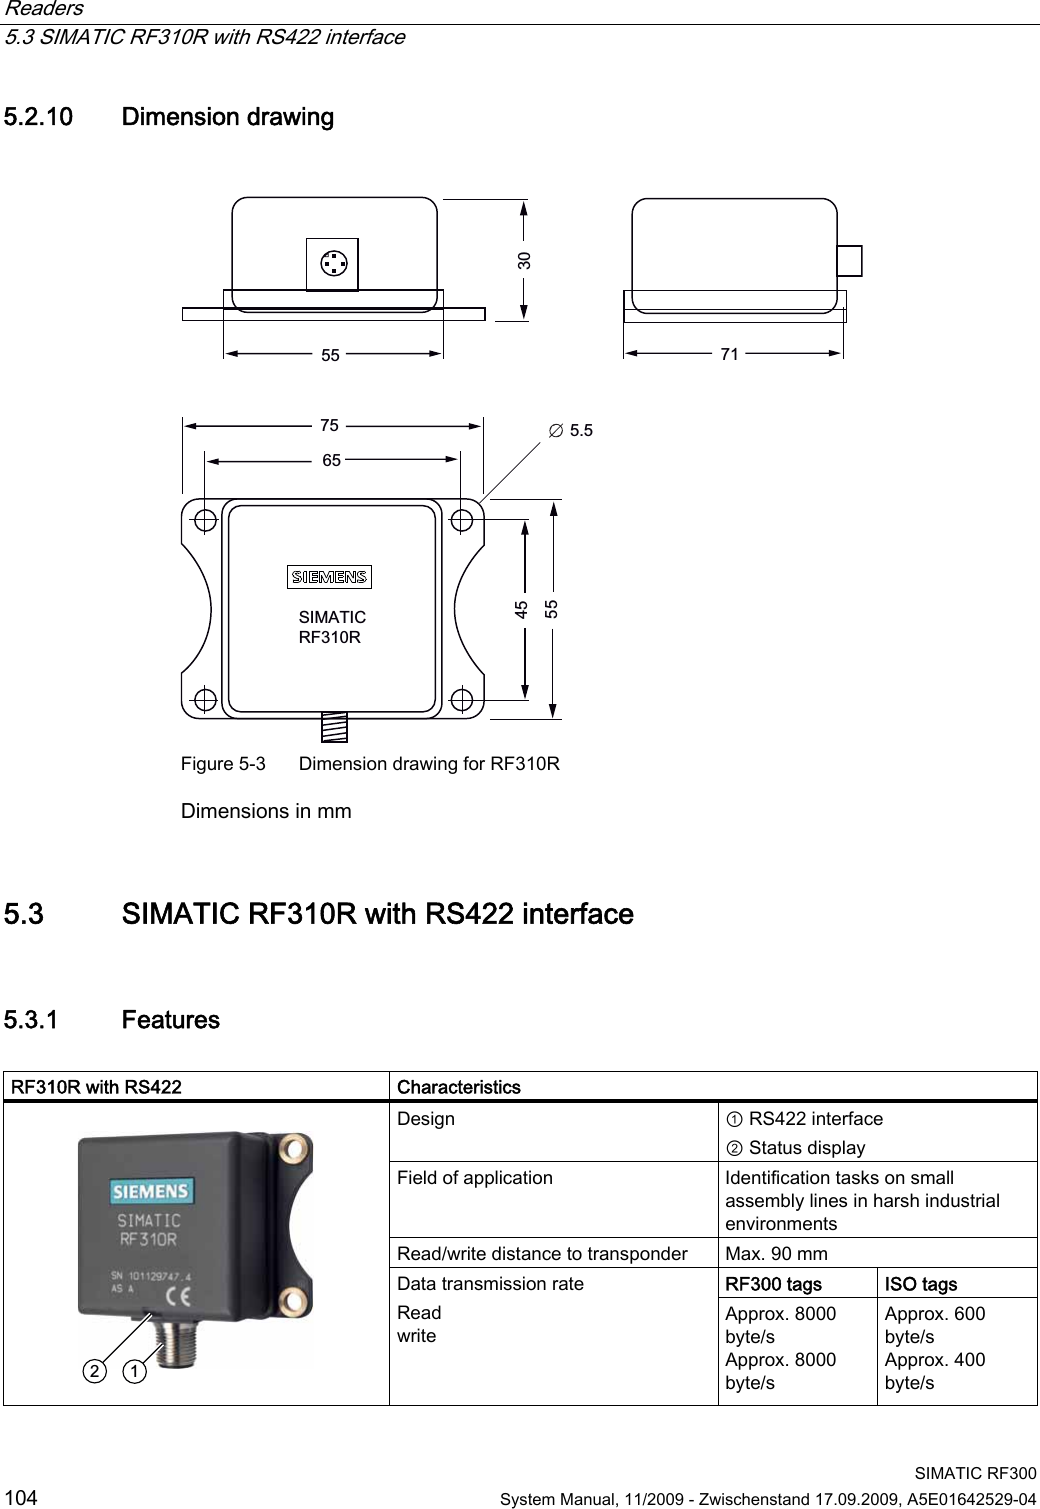 Readers   5.3 SIMATIC RF310R with RS422 interface  SIMATIC RF300 104  System Manual, 11/2009 - Zwischenstand 17.09.2009, A5E01642529-04 5.2.10 Dimension drawing   6,0$7,&amp;5)5 Figure 5-3  Dimension drawing for RF310R Dimensions in mm 5.3 SIMATIC RF310R with RS422 interface 5.3.1 Features  RF310R with RS422   Characteristics Design  ① RS422 interface ② Status display Field of application  Identification tasks on small assembly lines in harsh industrial environments Read/write distance to transponder  Max. 90 mm RF300 tags ISO tags    Data transmission rate Read write Approx. 8000 byte/s Approx. 8000 byte/s Approx. 600 byte/s Approx. 400 byte/s 